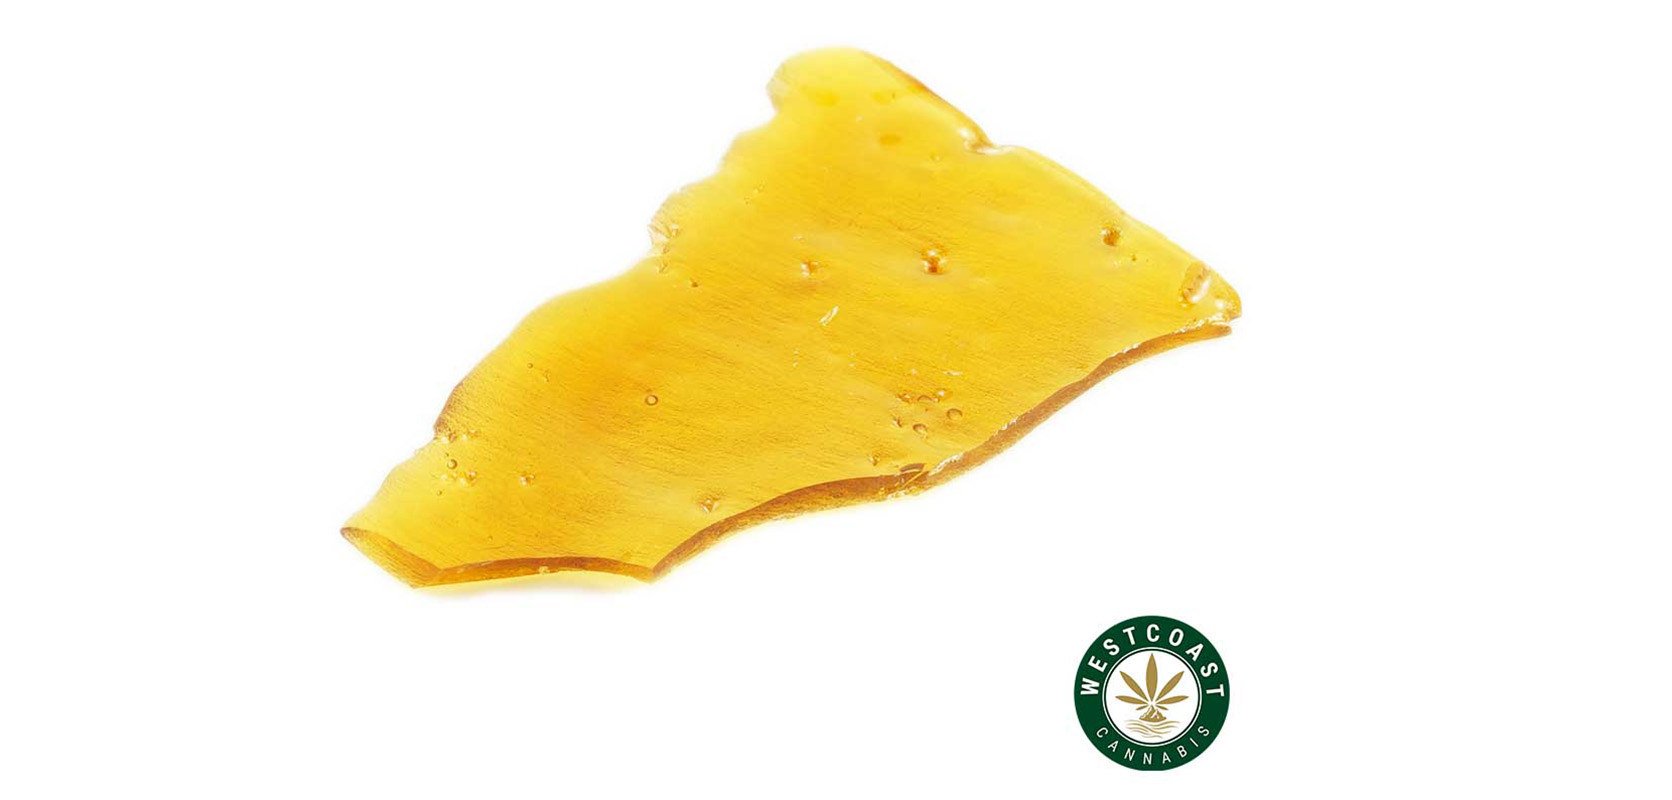 image of shatter from marijuana. buy shatter weed and Do-Si-Dos weed strain online in Canada. But pot online dispensary.